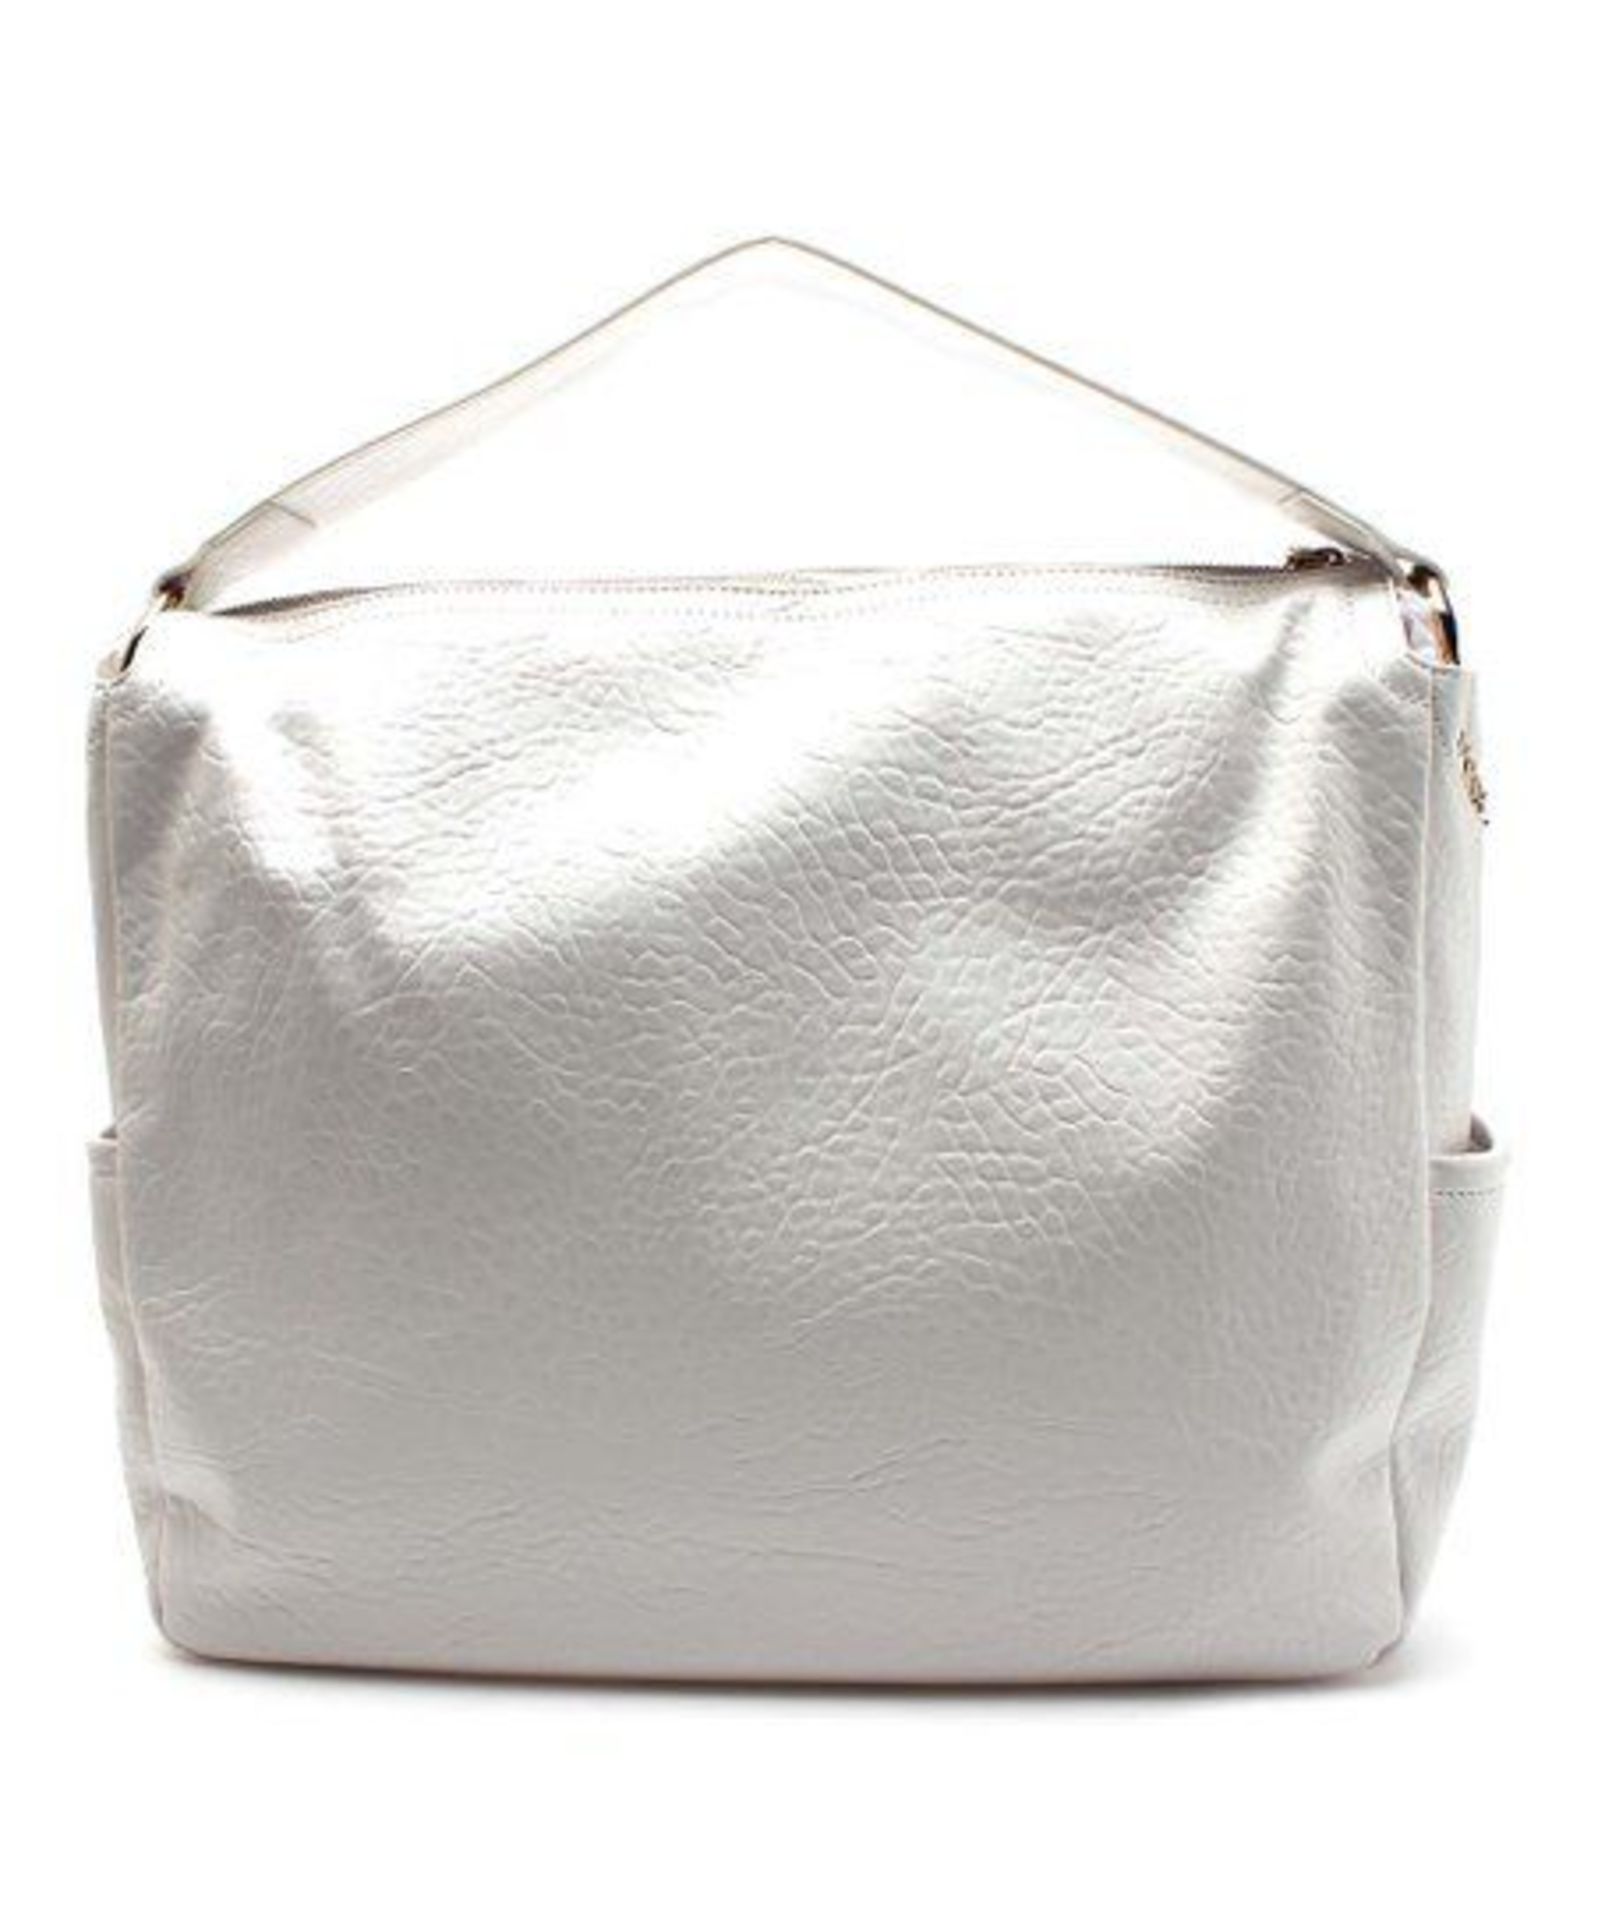 Versace Jeans Collection White Square Hobo (New With Tags) [Ref: 39836039-Tf-Tub 3-Tf] - Image 2 of 2